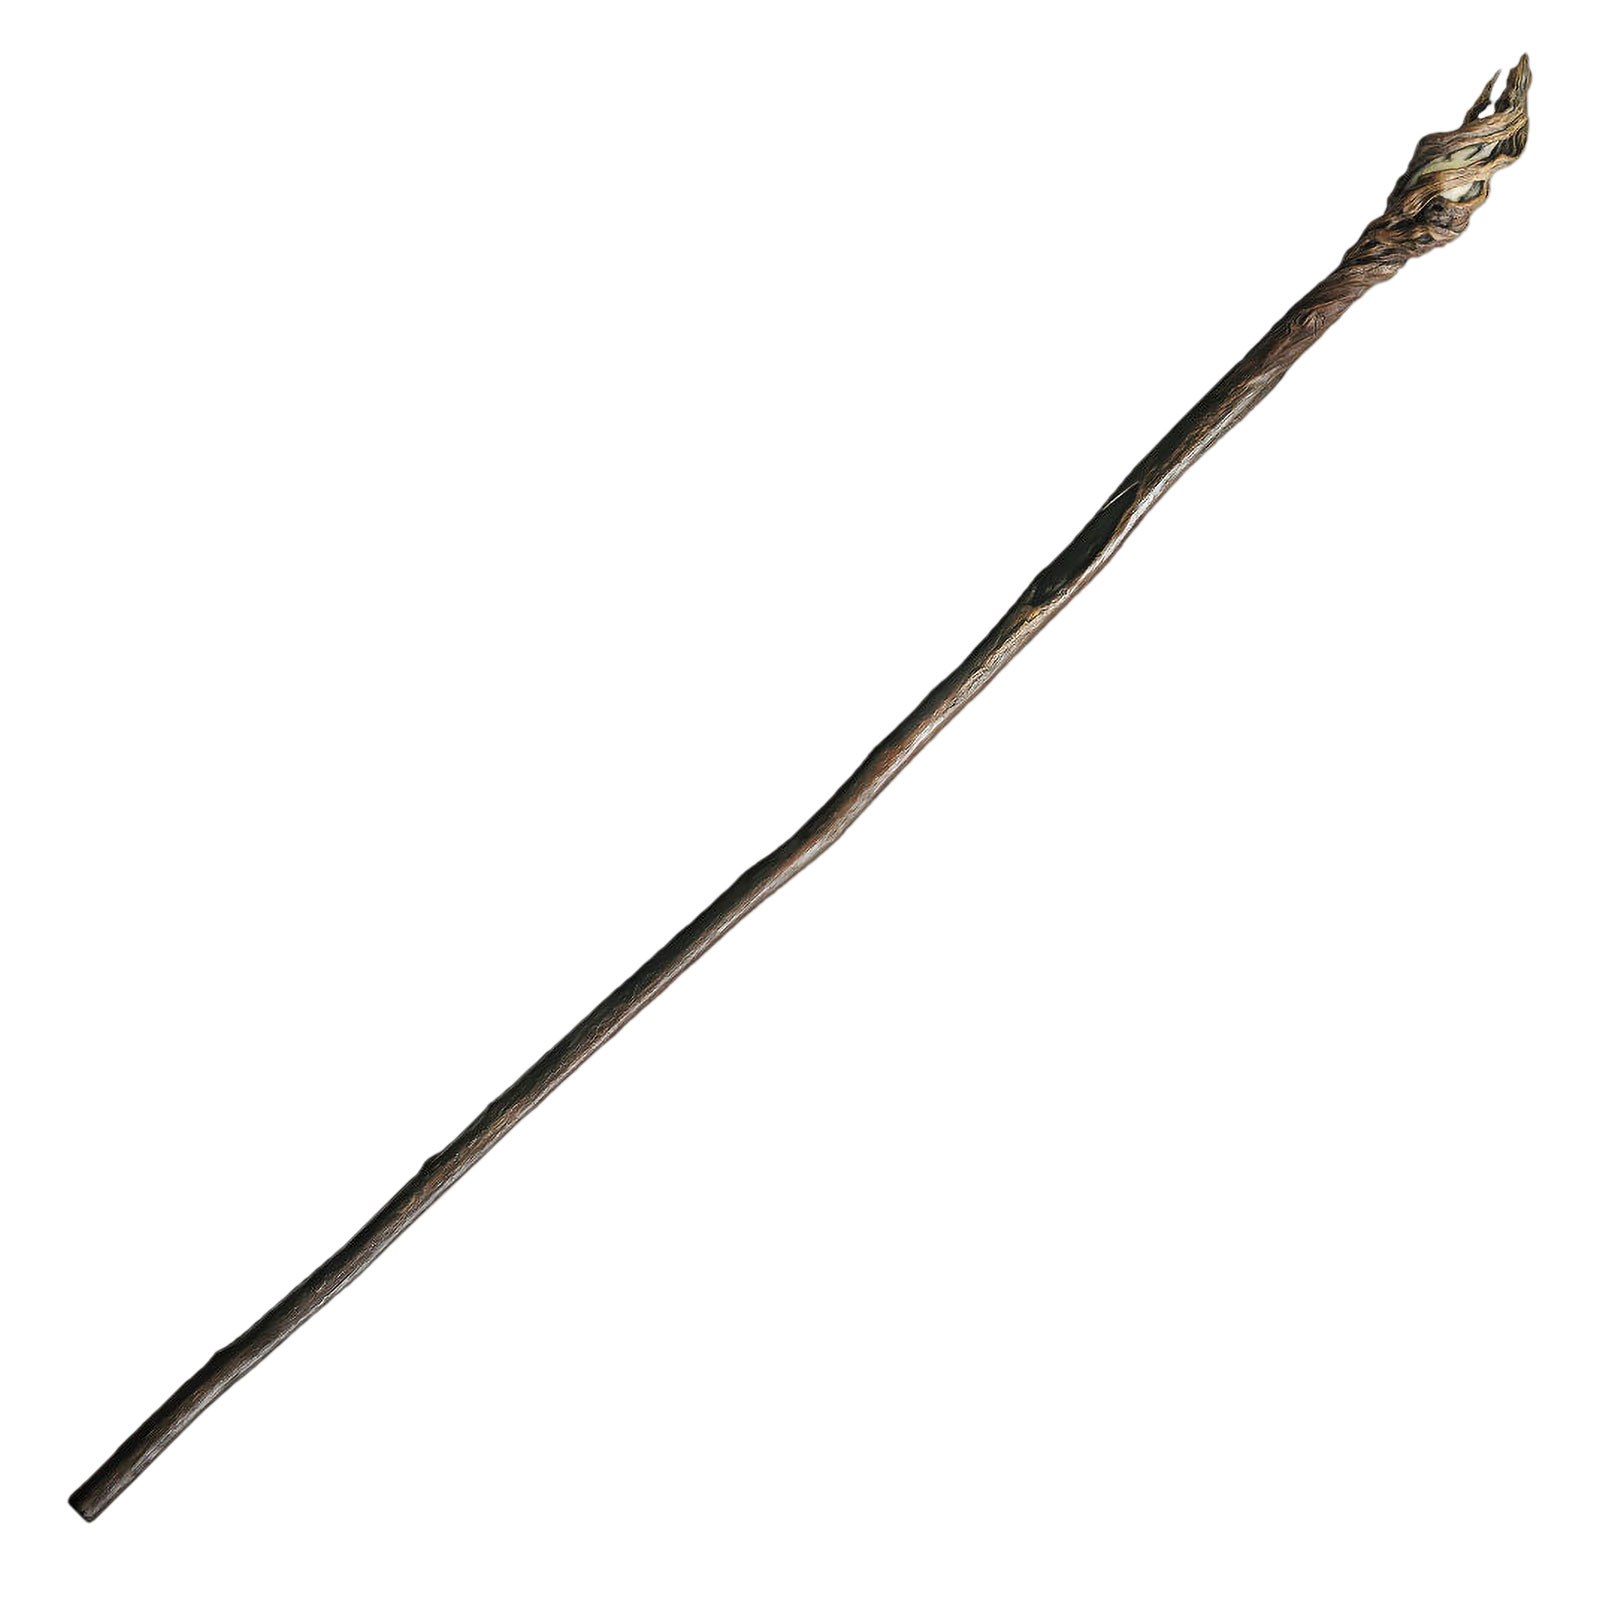 Lord of the Rings - Gandalf the Grey Staff with Light Function